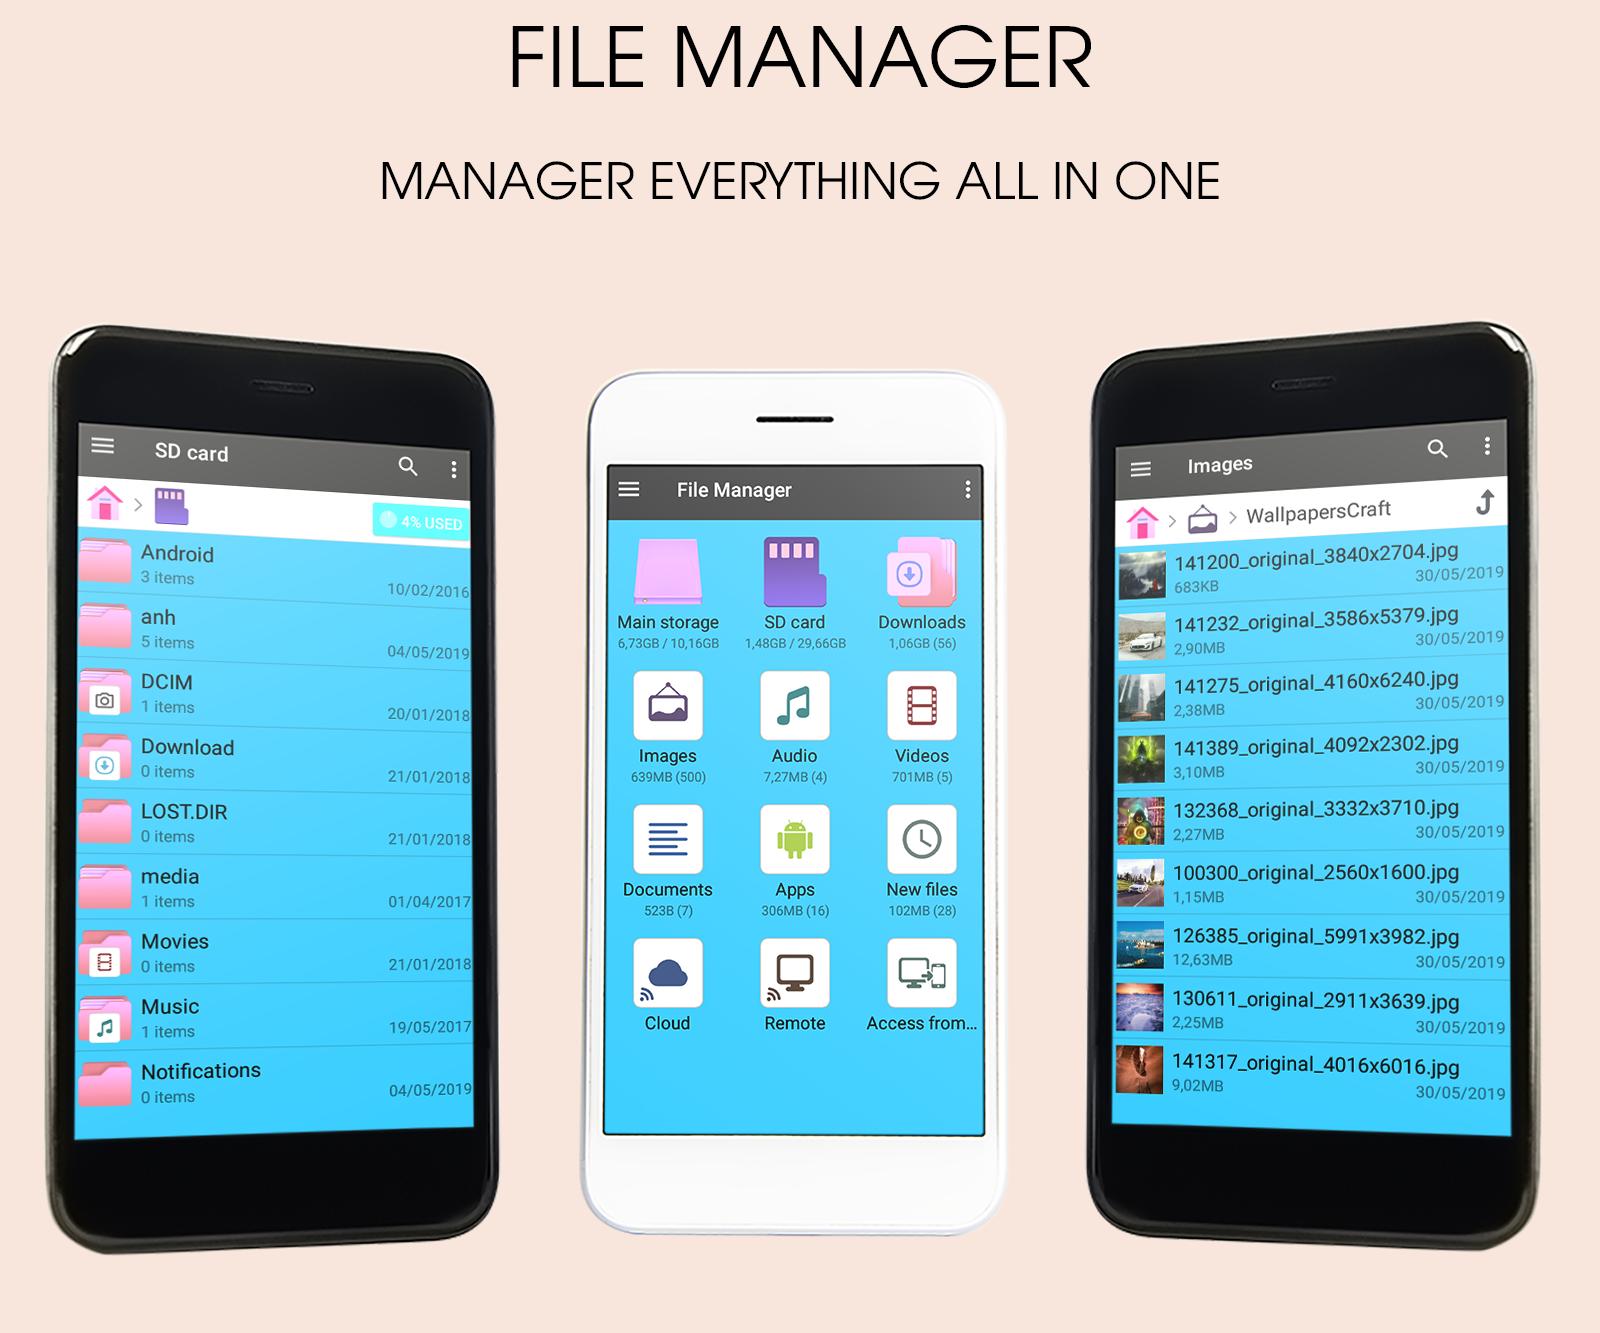 Android file size. Файловый менеджер. Файловый менеджер для андроид. File Manager APK. Таблица теста файловых менеджеров андроид.